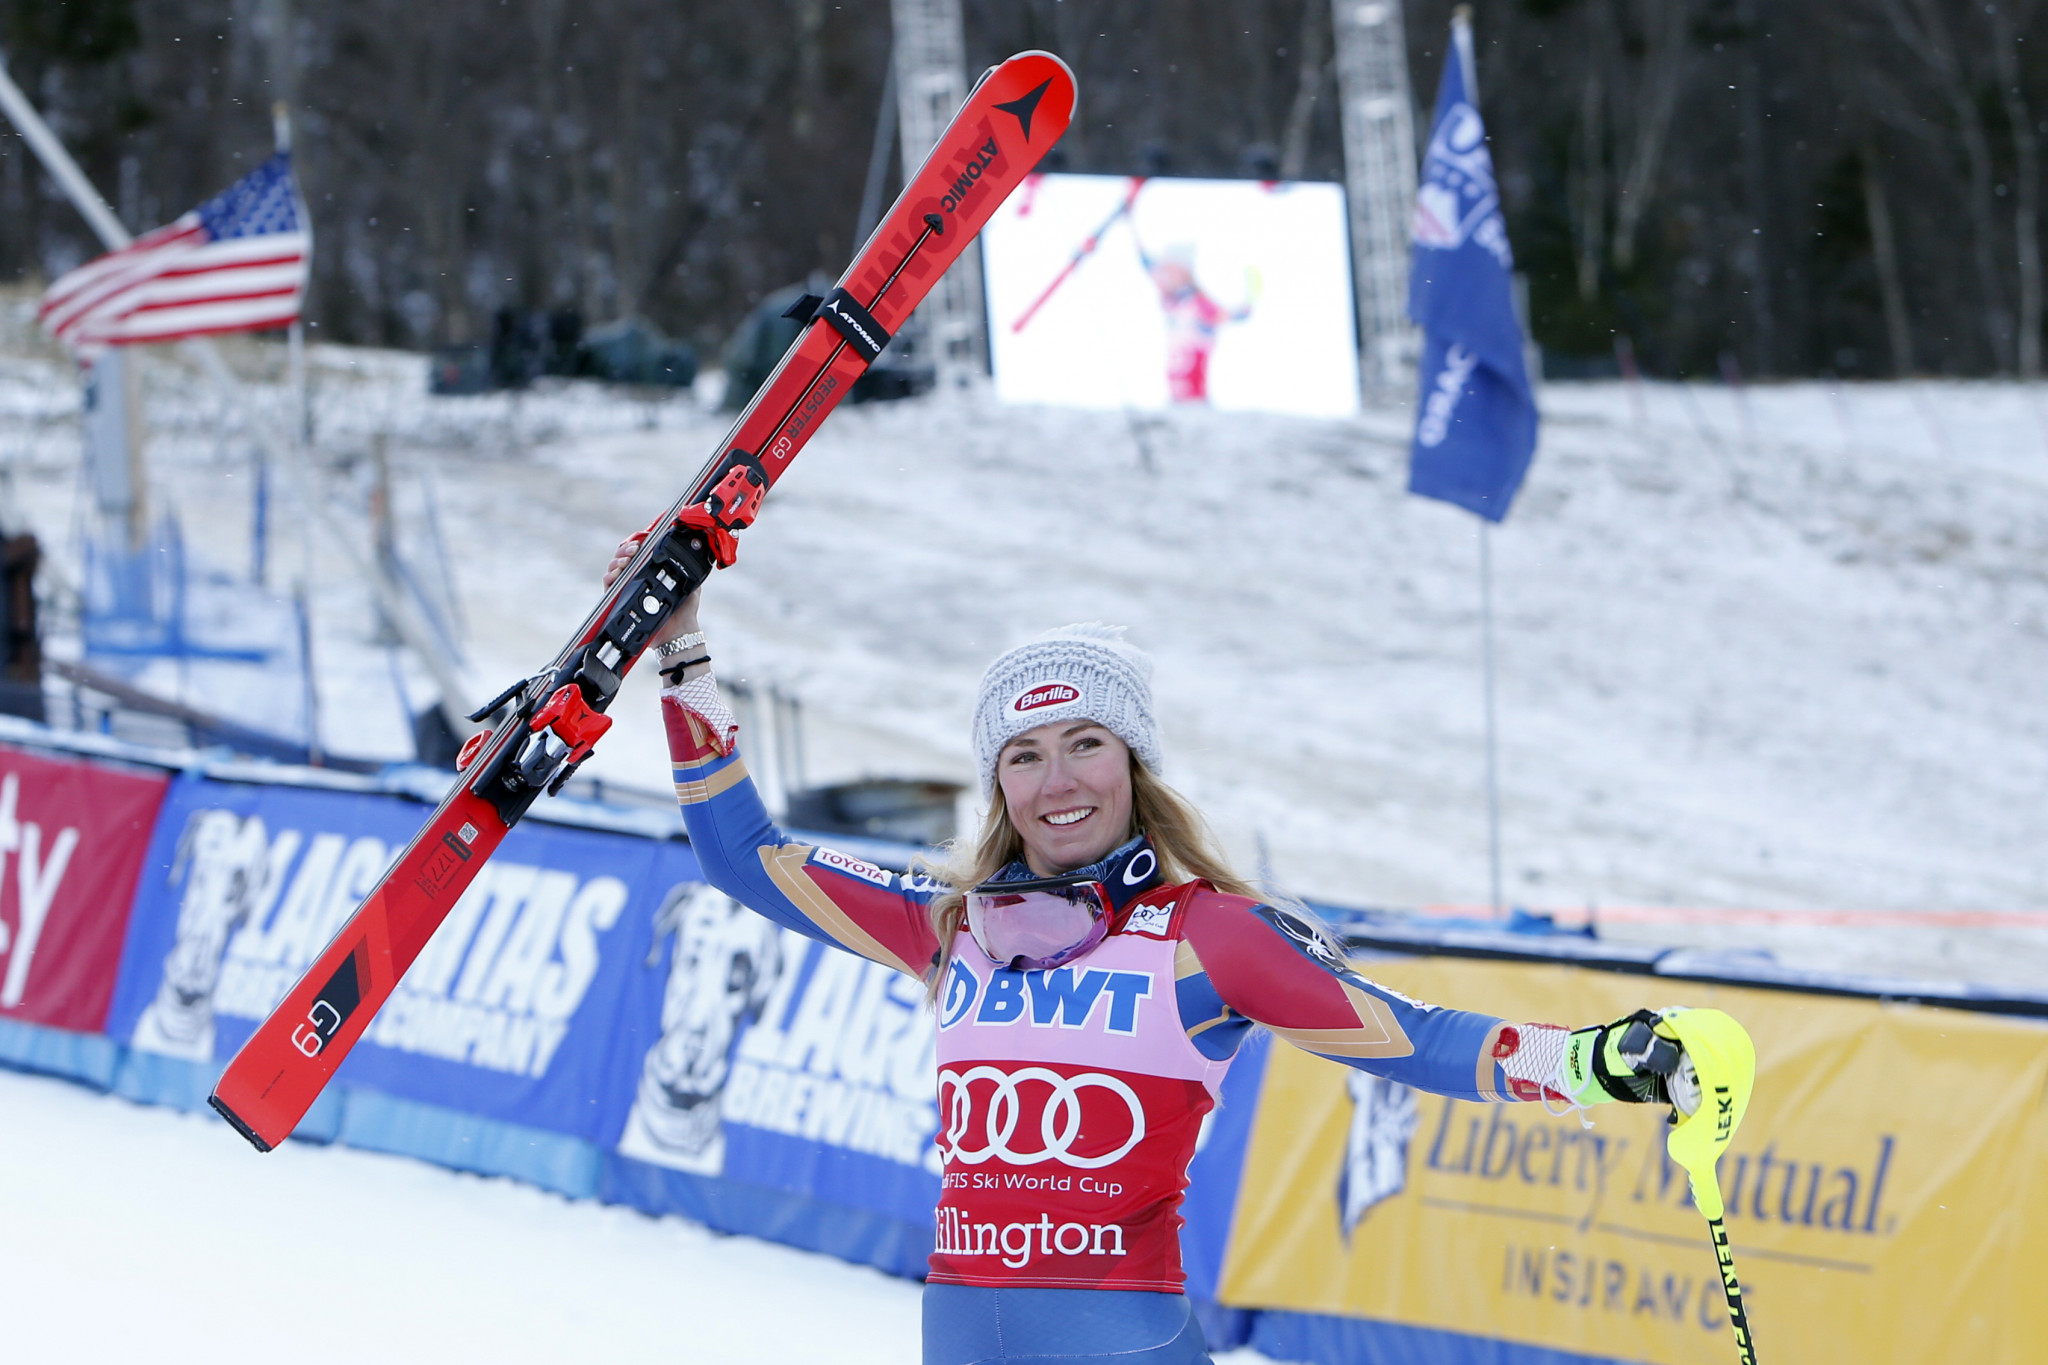 Mikaela Shiffrin claimed her first victory of the FIS Alpine Skiing World Cup season today ©Getty Images